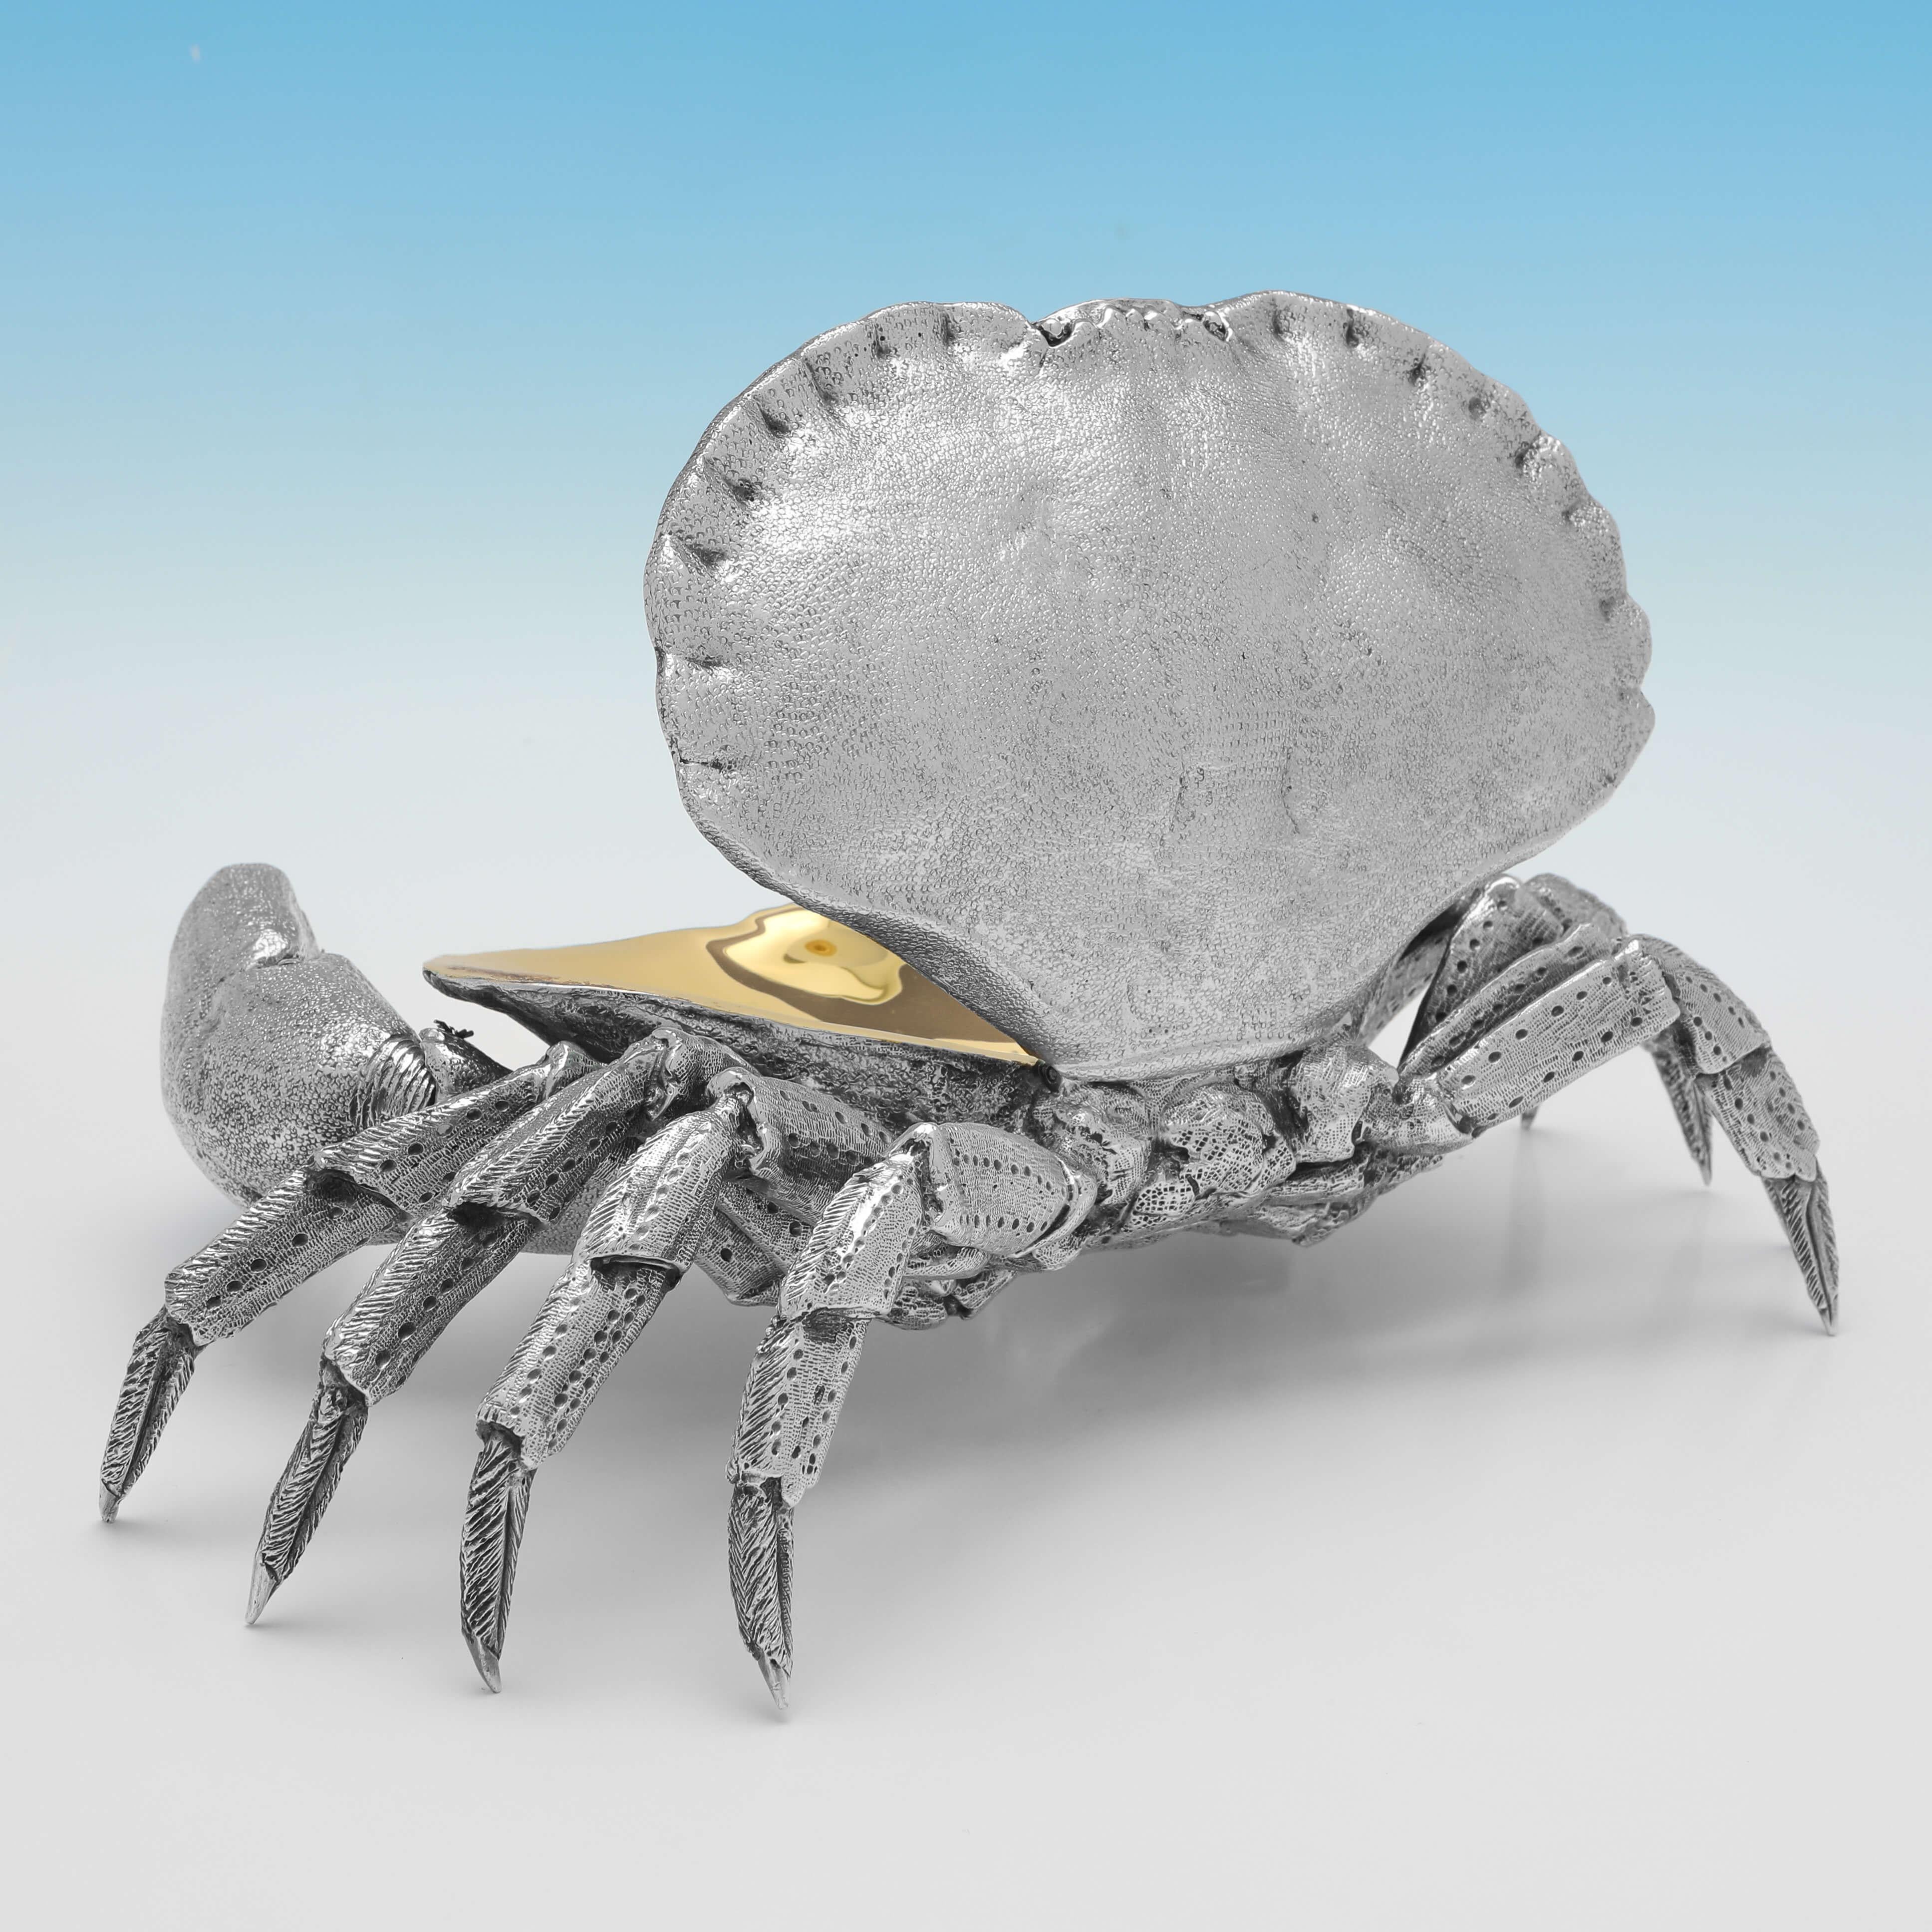 English Life Sized & Heavy Sterling Silver Crab Model, Crab Serving Dish, Made in 2007